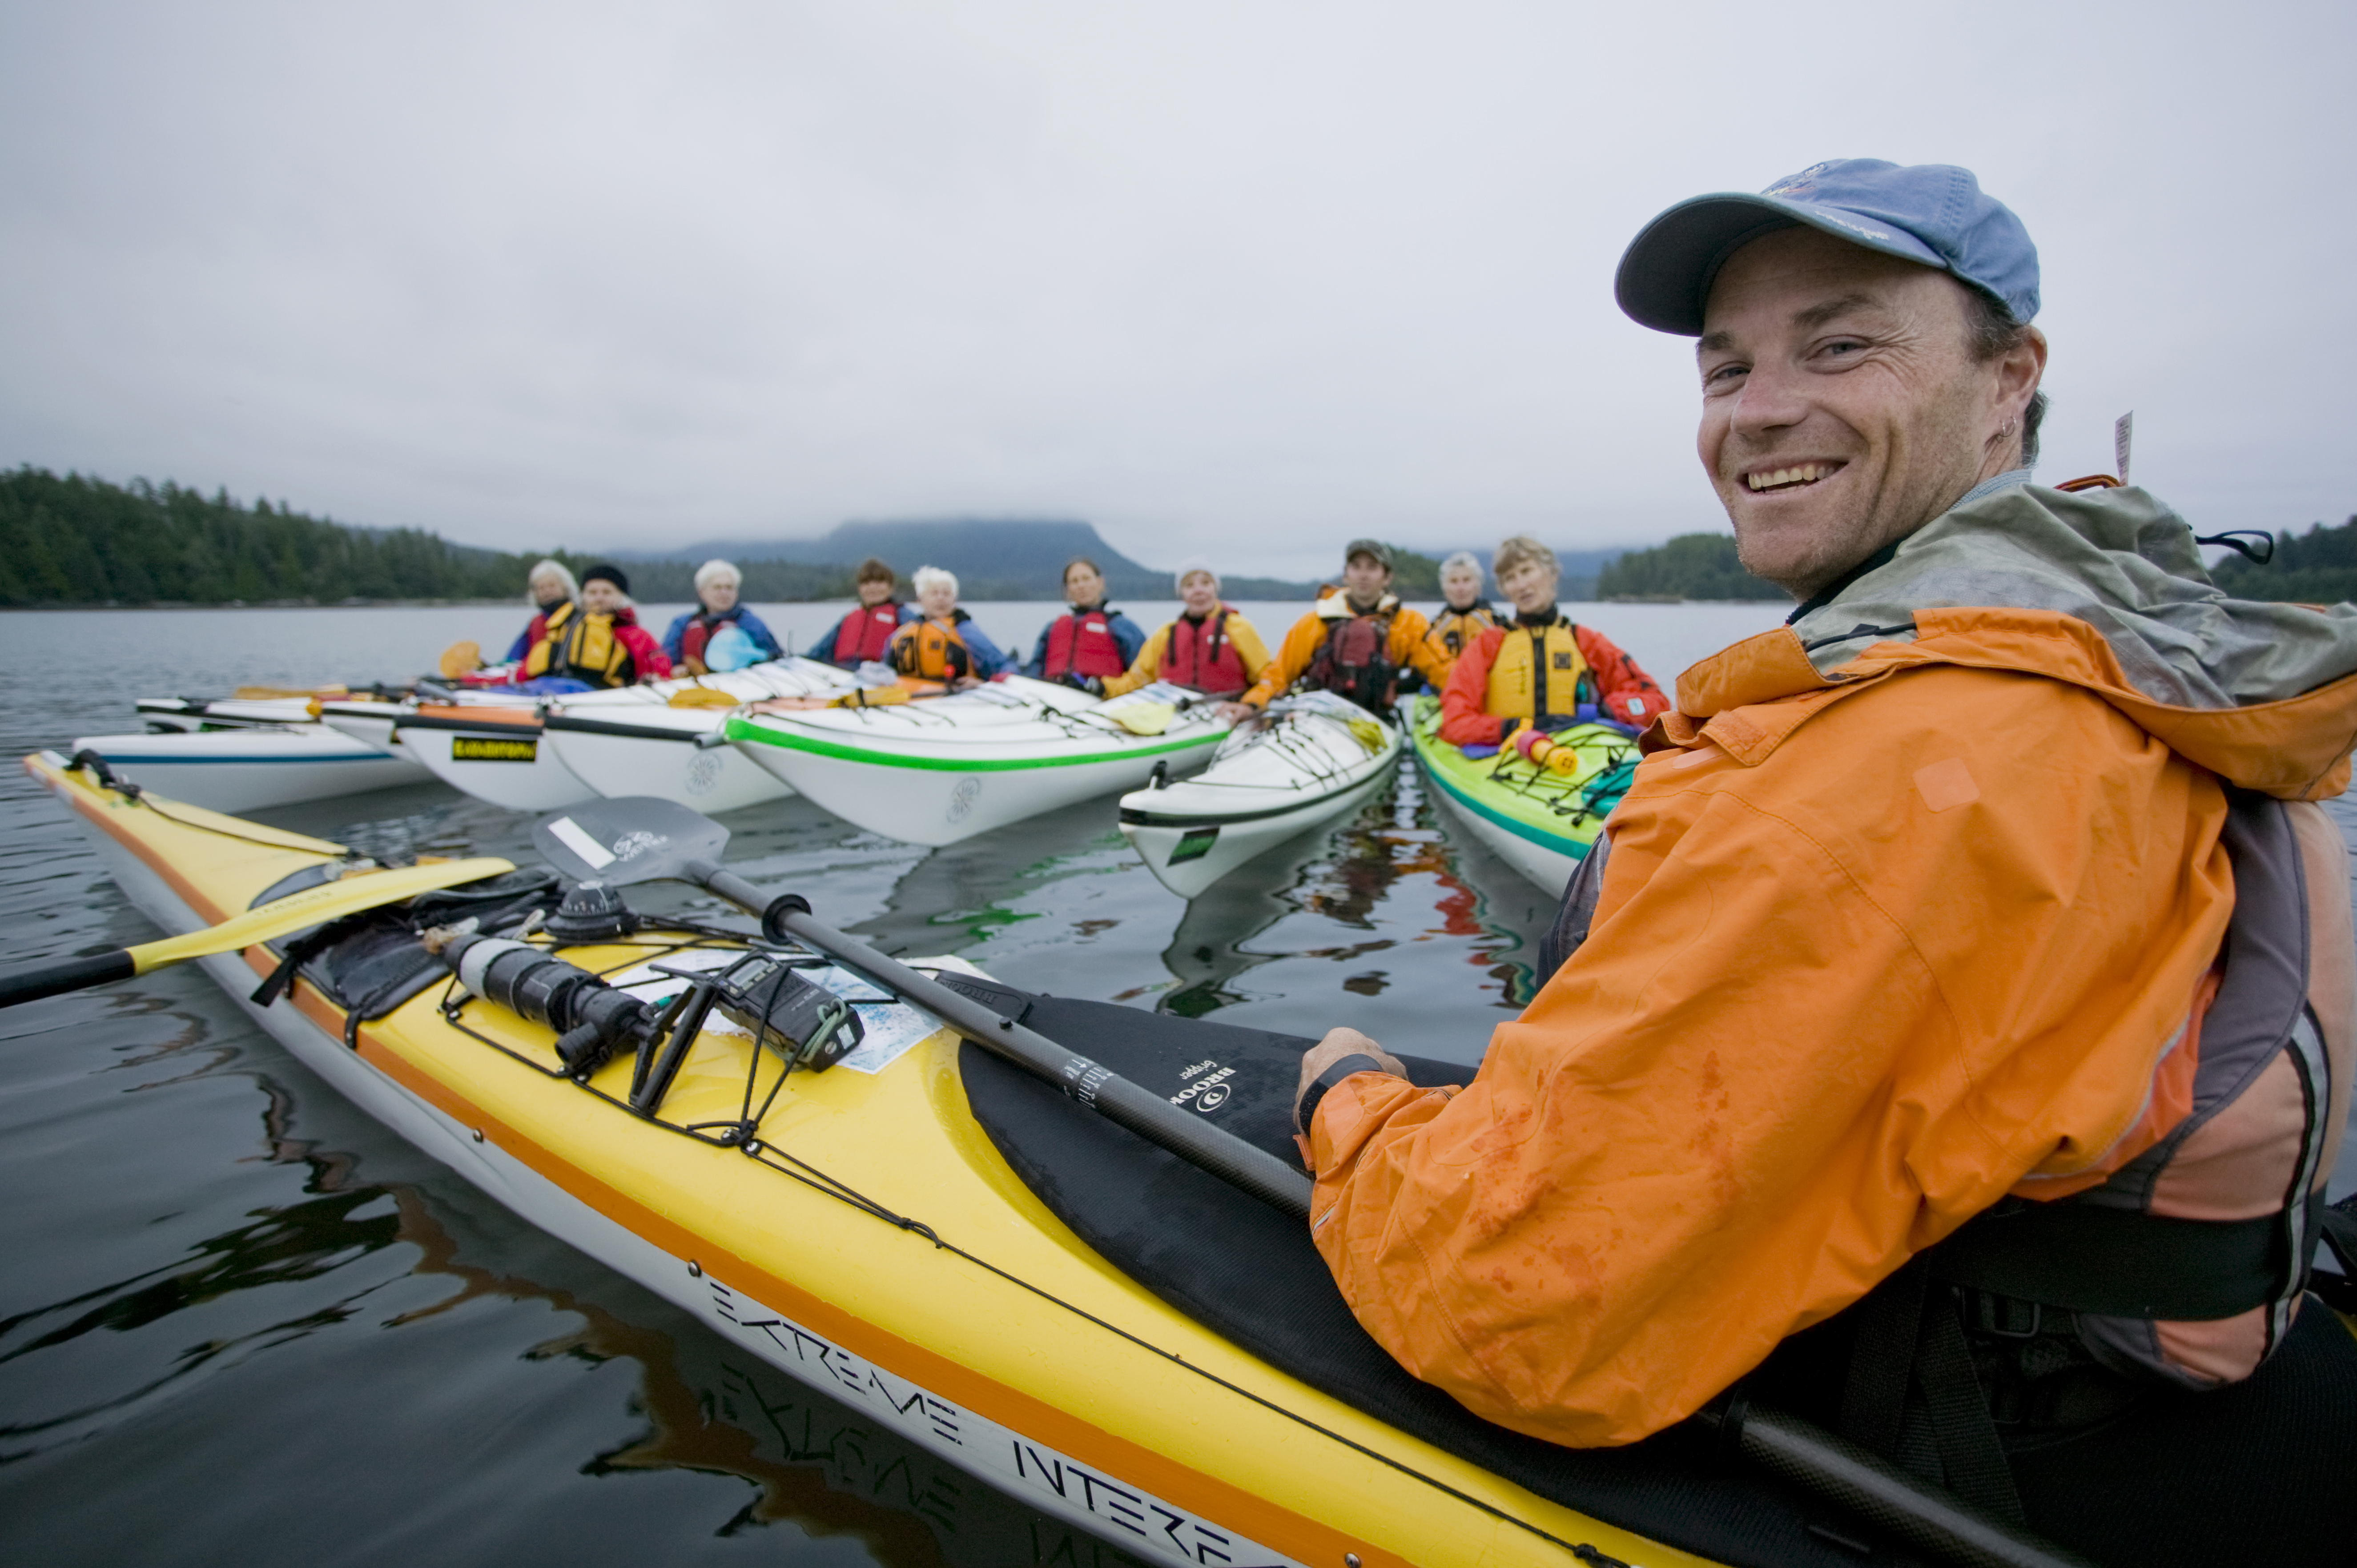 A Kayak guide gives instruction to a group of senior paddlers exploring the area around Spring Island in the Kyuquot Sound area of Northern Vancouver Island. Spring Island, Kyuquot Sound, Vancouver Island, British Columbia, Canada.